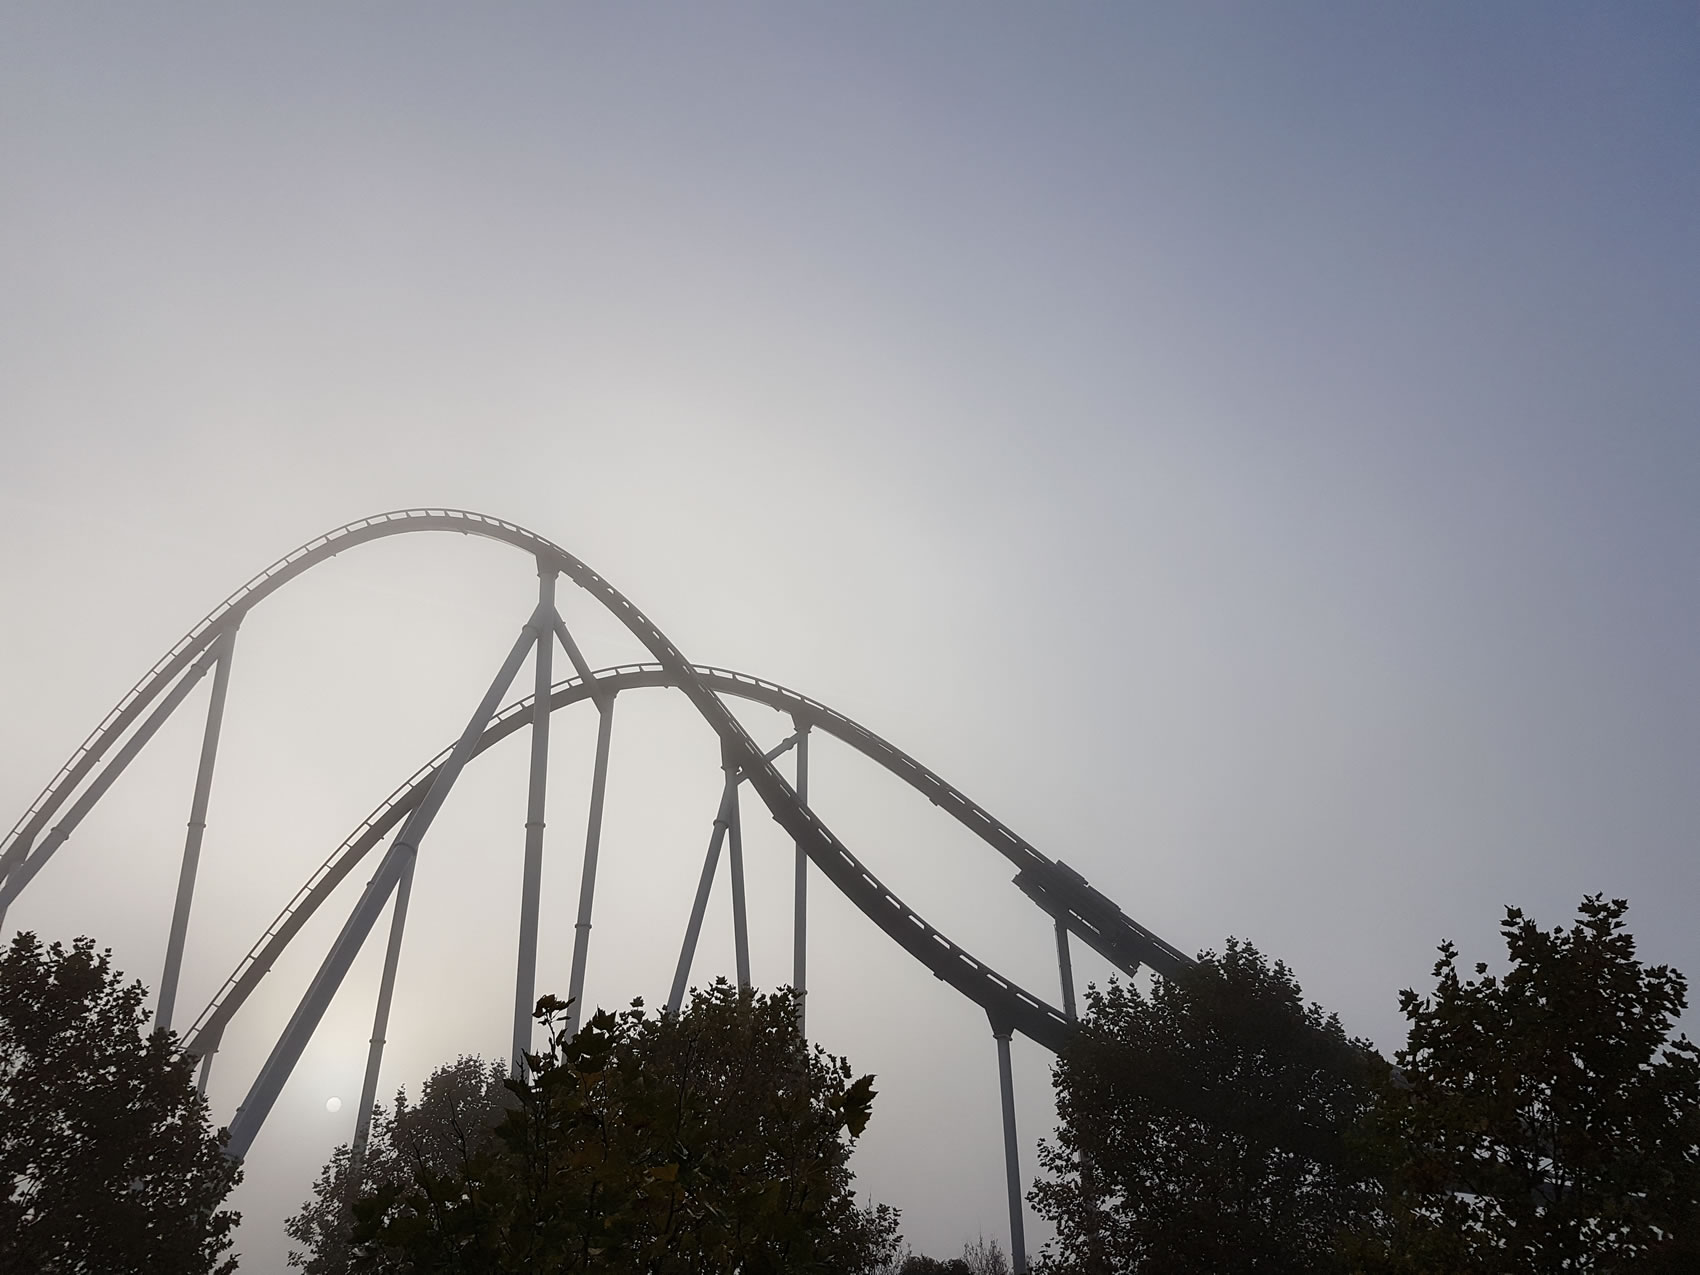 Europa-Park: The adventure, the excitement and the pumpkins - Image Credit BreakingStereotypes.org